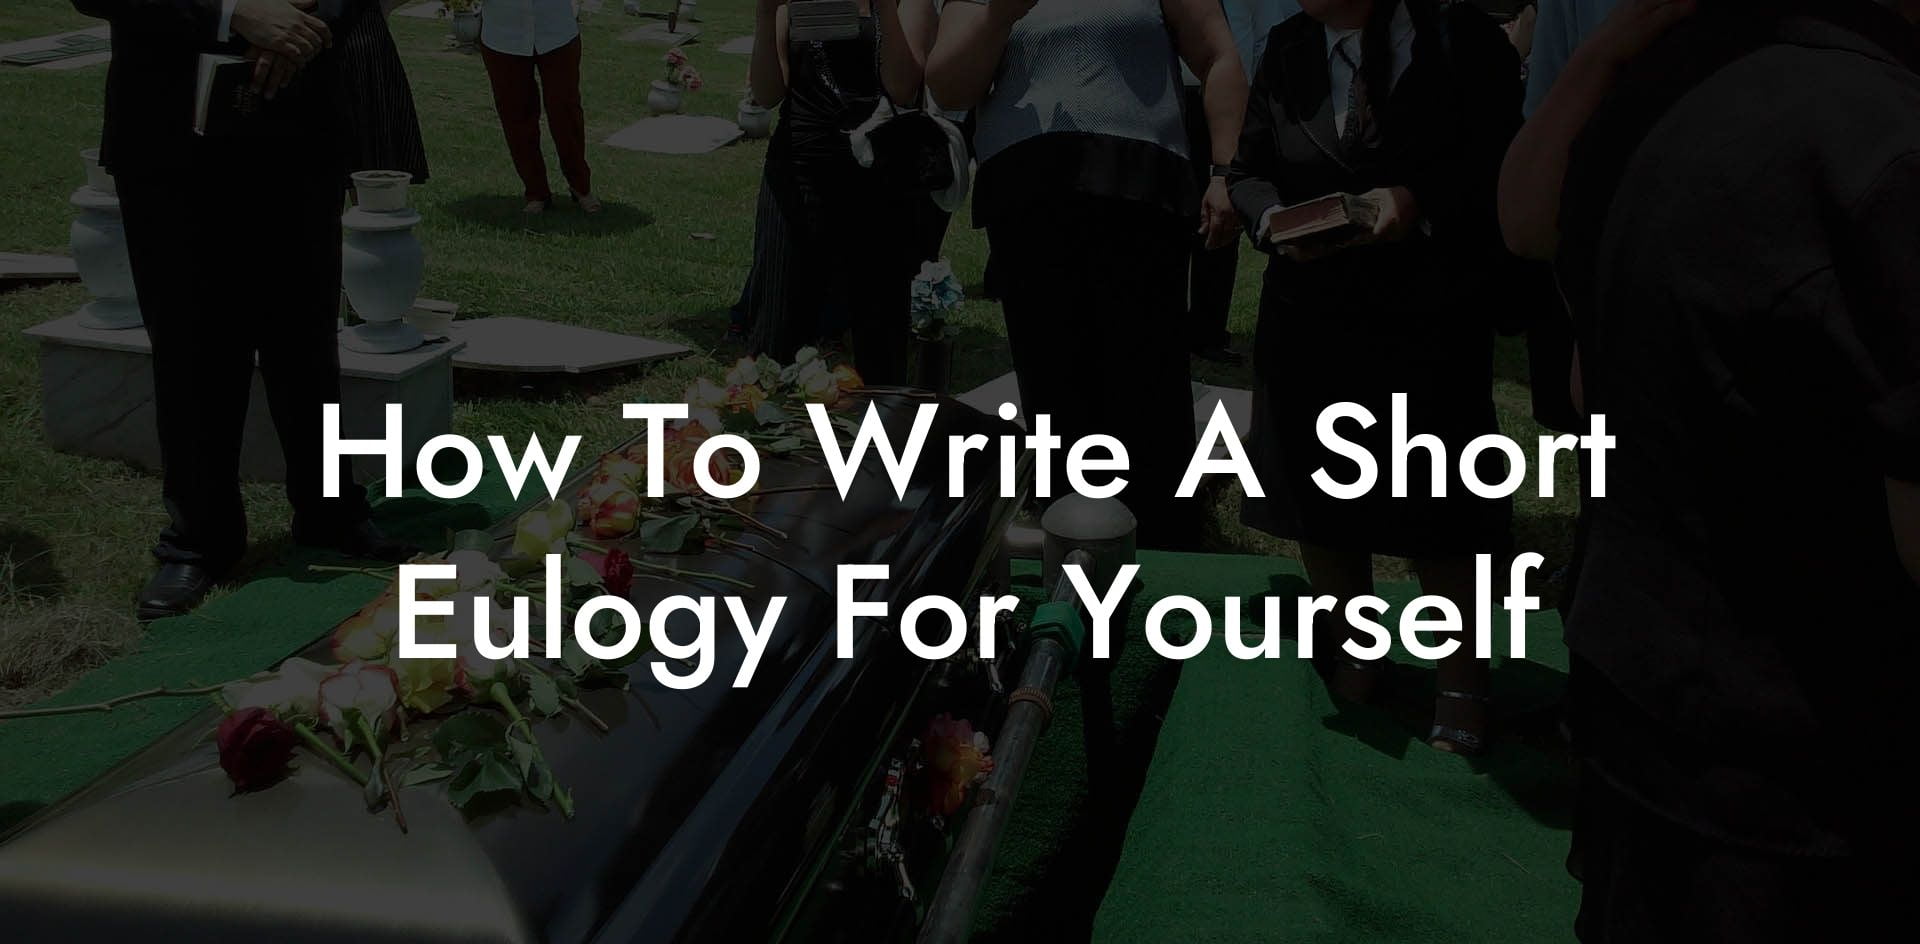 How To Write A Short Eulogy For Yourself